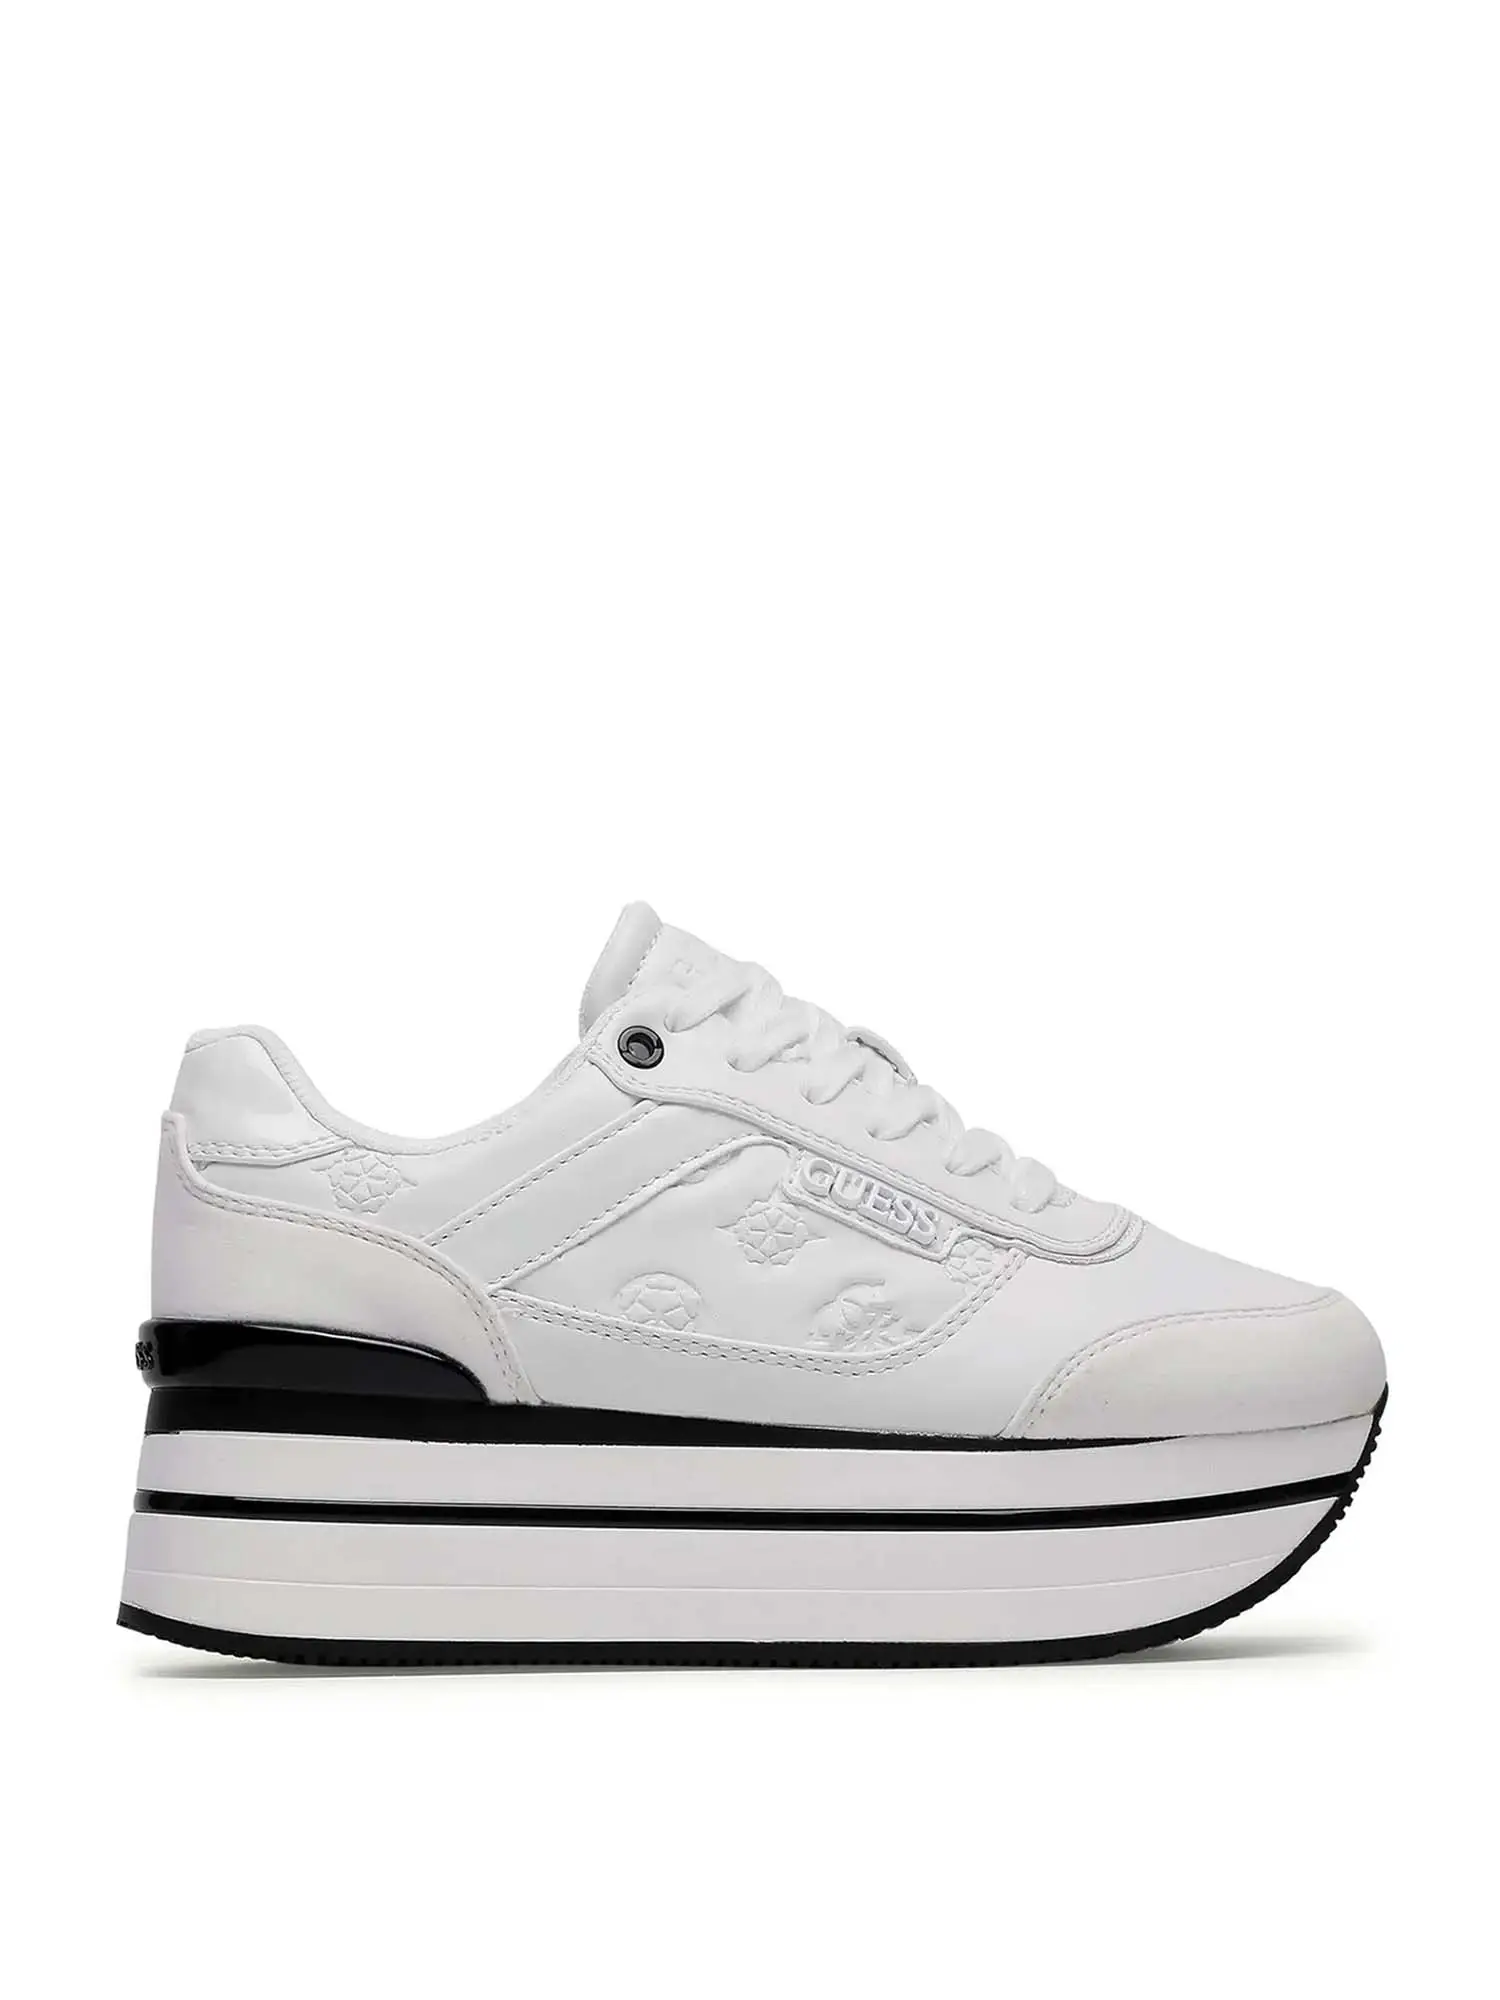 SNEAKERS DONNA - GUESS - FL5HNS PEL12 - BIANCO, 40